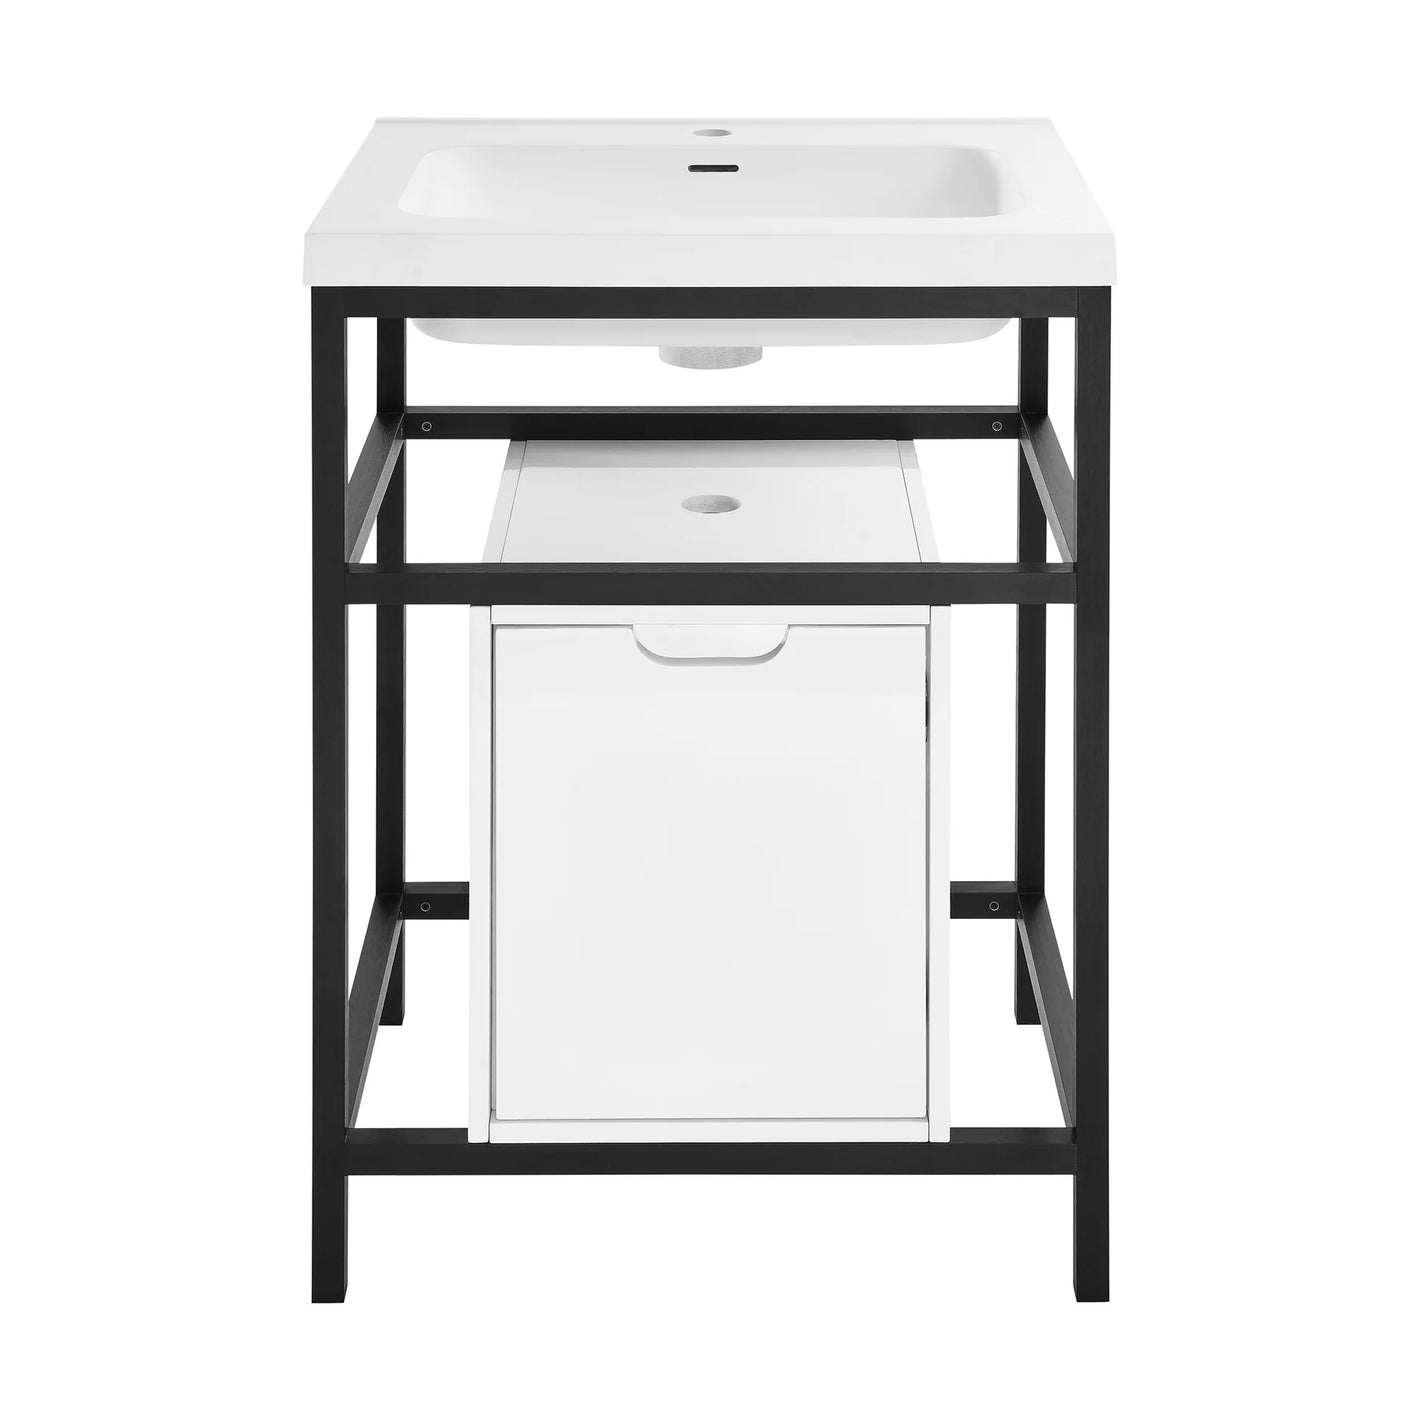 Ivy 24" Freestanding Bathroom Vanity in Glossy White with Matte Black Frame﻿